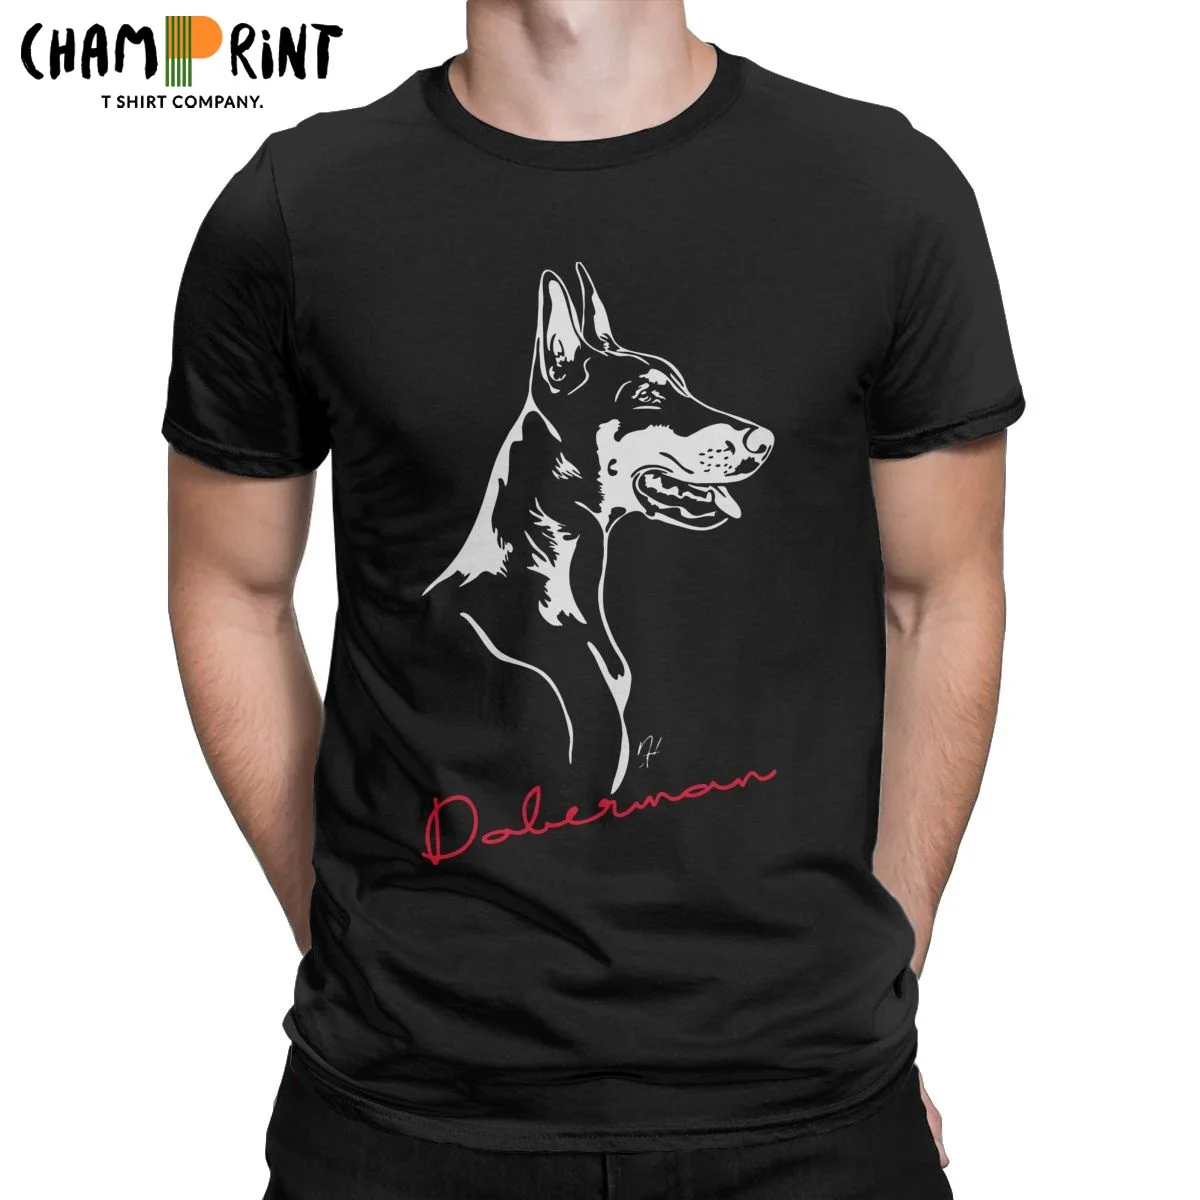 

Doberman Dog Canine Portrait T-Shirts for Men Pinscher Pet Owners Dog Puppy Funny Pure Cotton Tees T Shirts Party Clothes